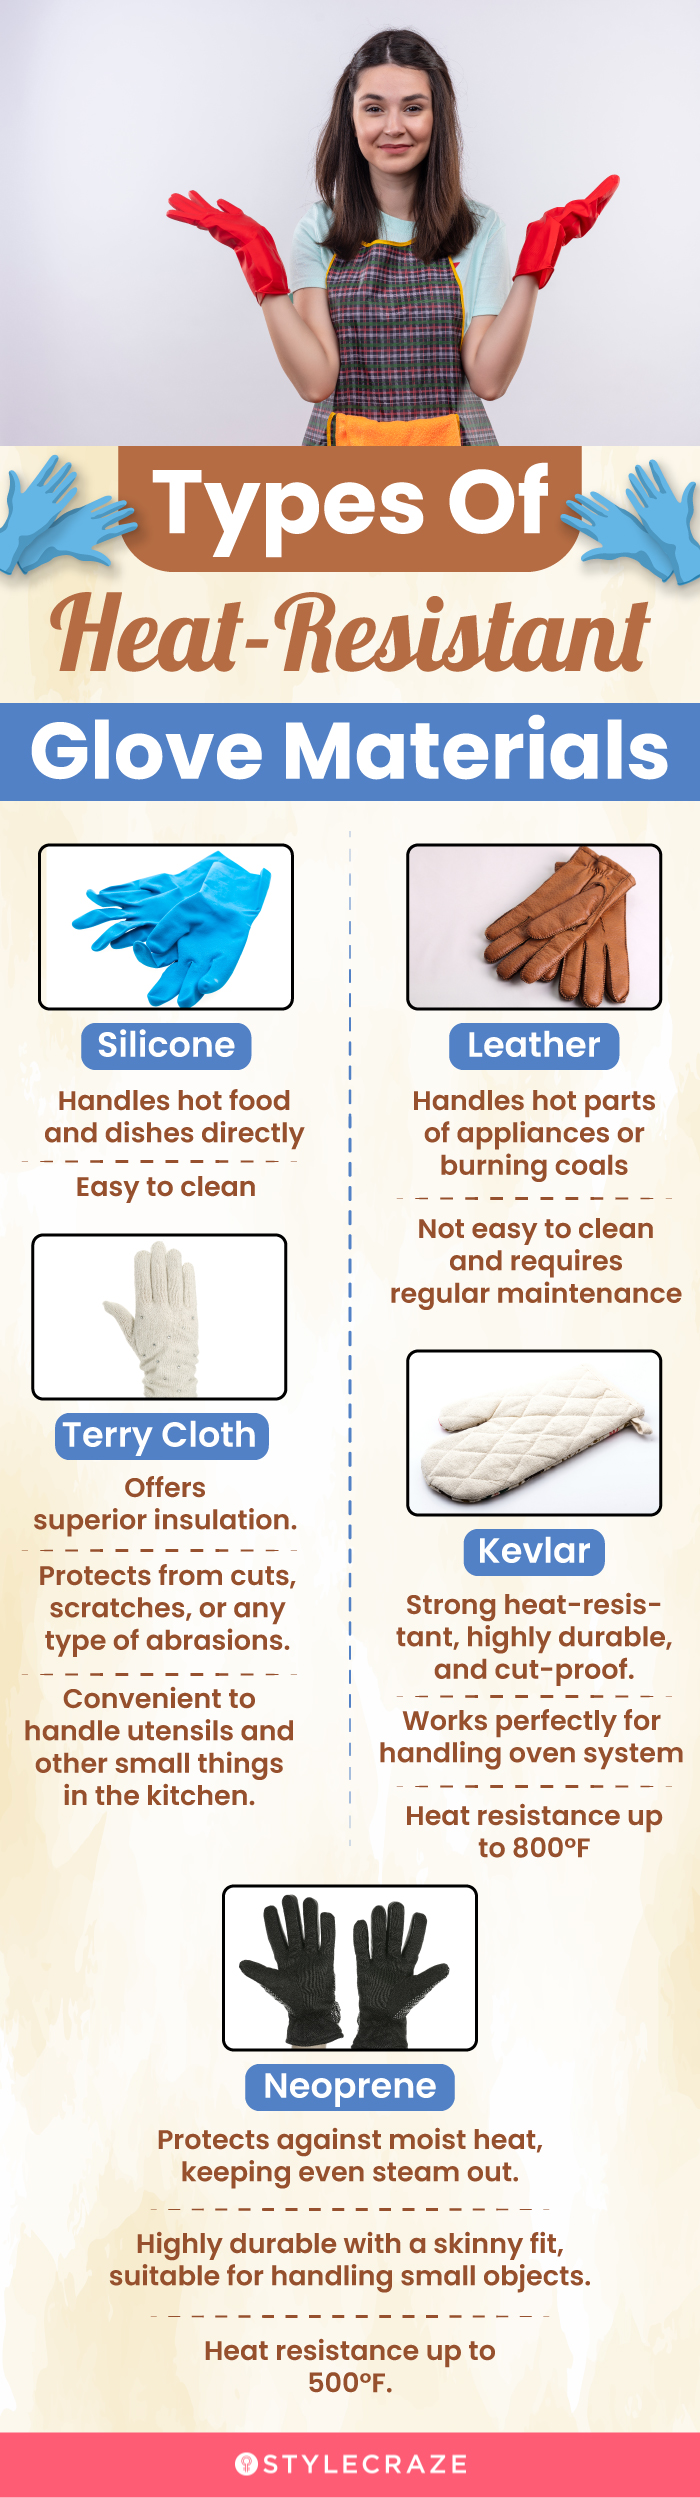 Types Of Heat-Resistant Glove Materials (infographic)